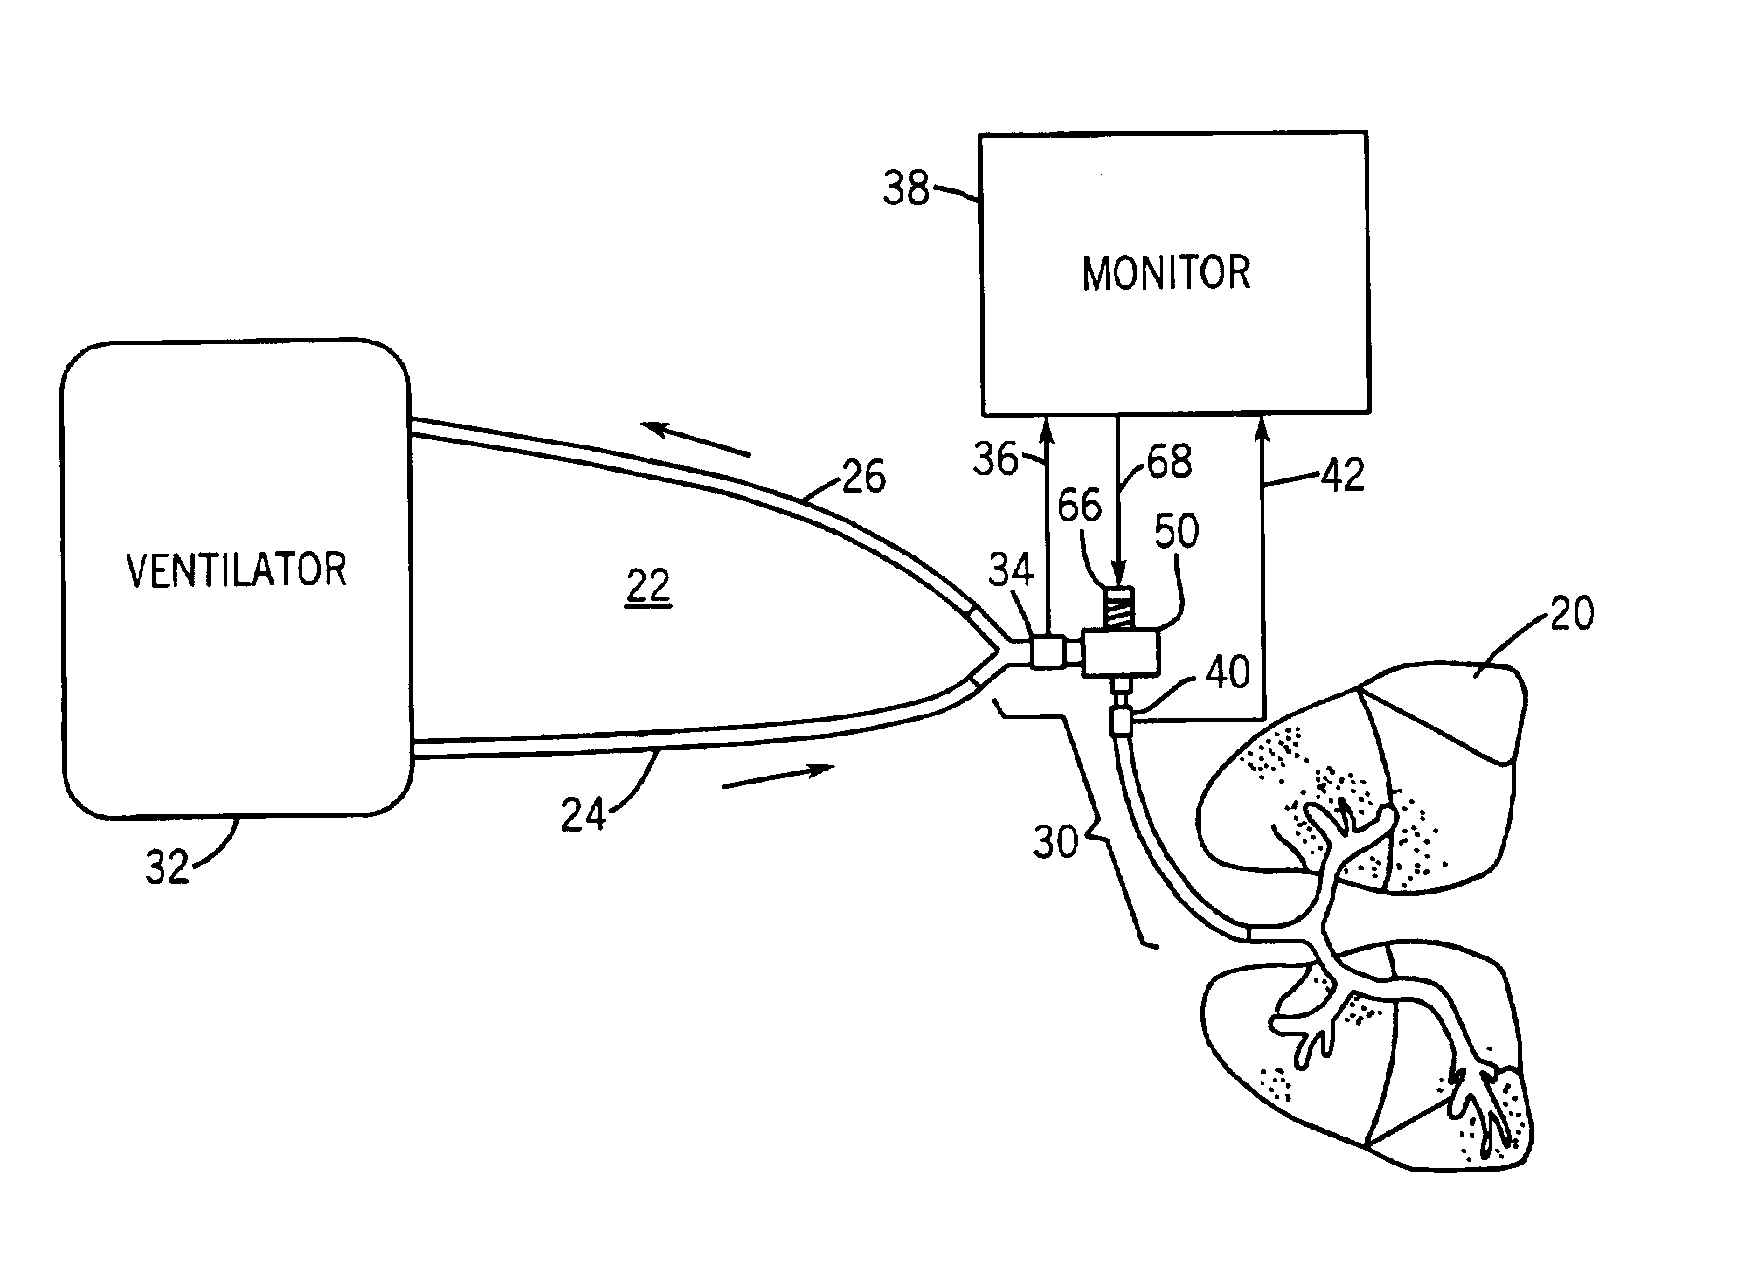 Apparatus and method for use in non-invasively determining conditions in the circulatory system of a subject